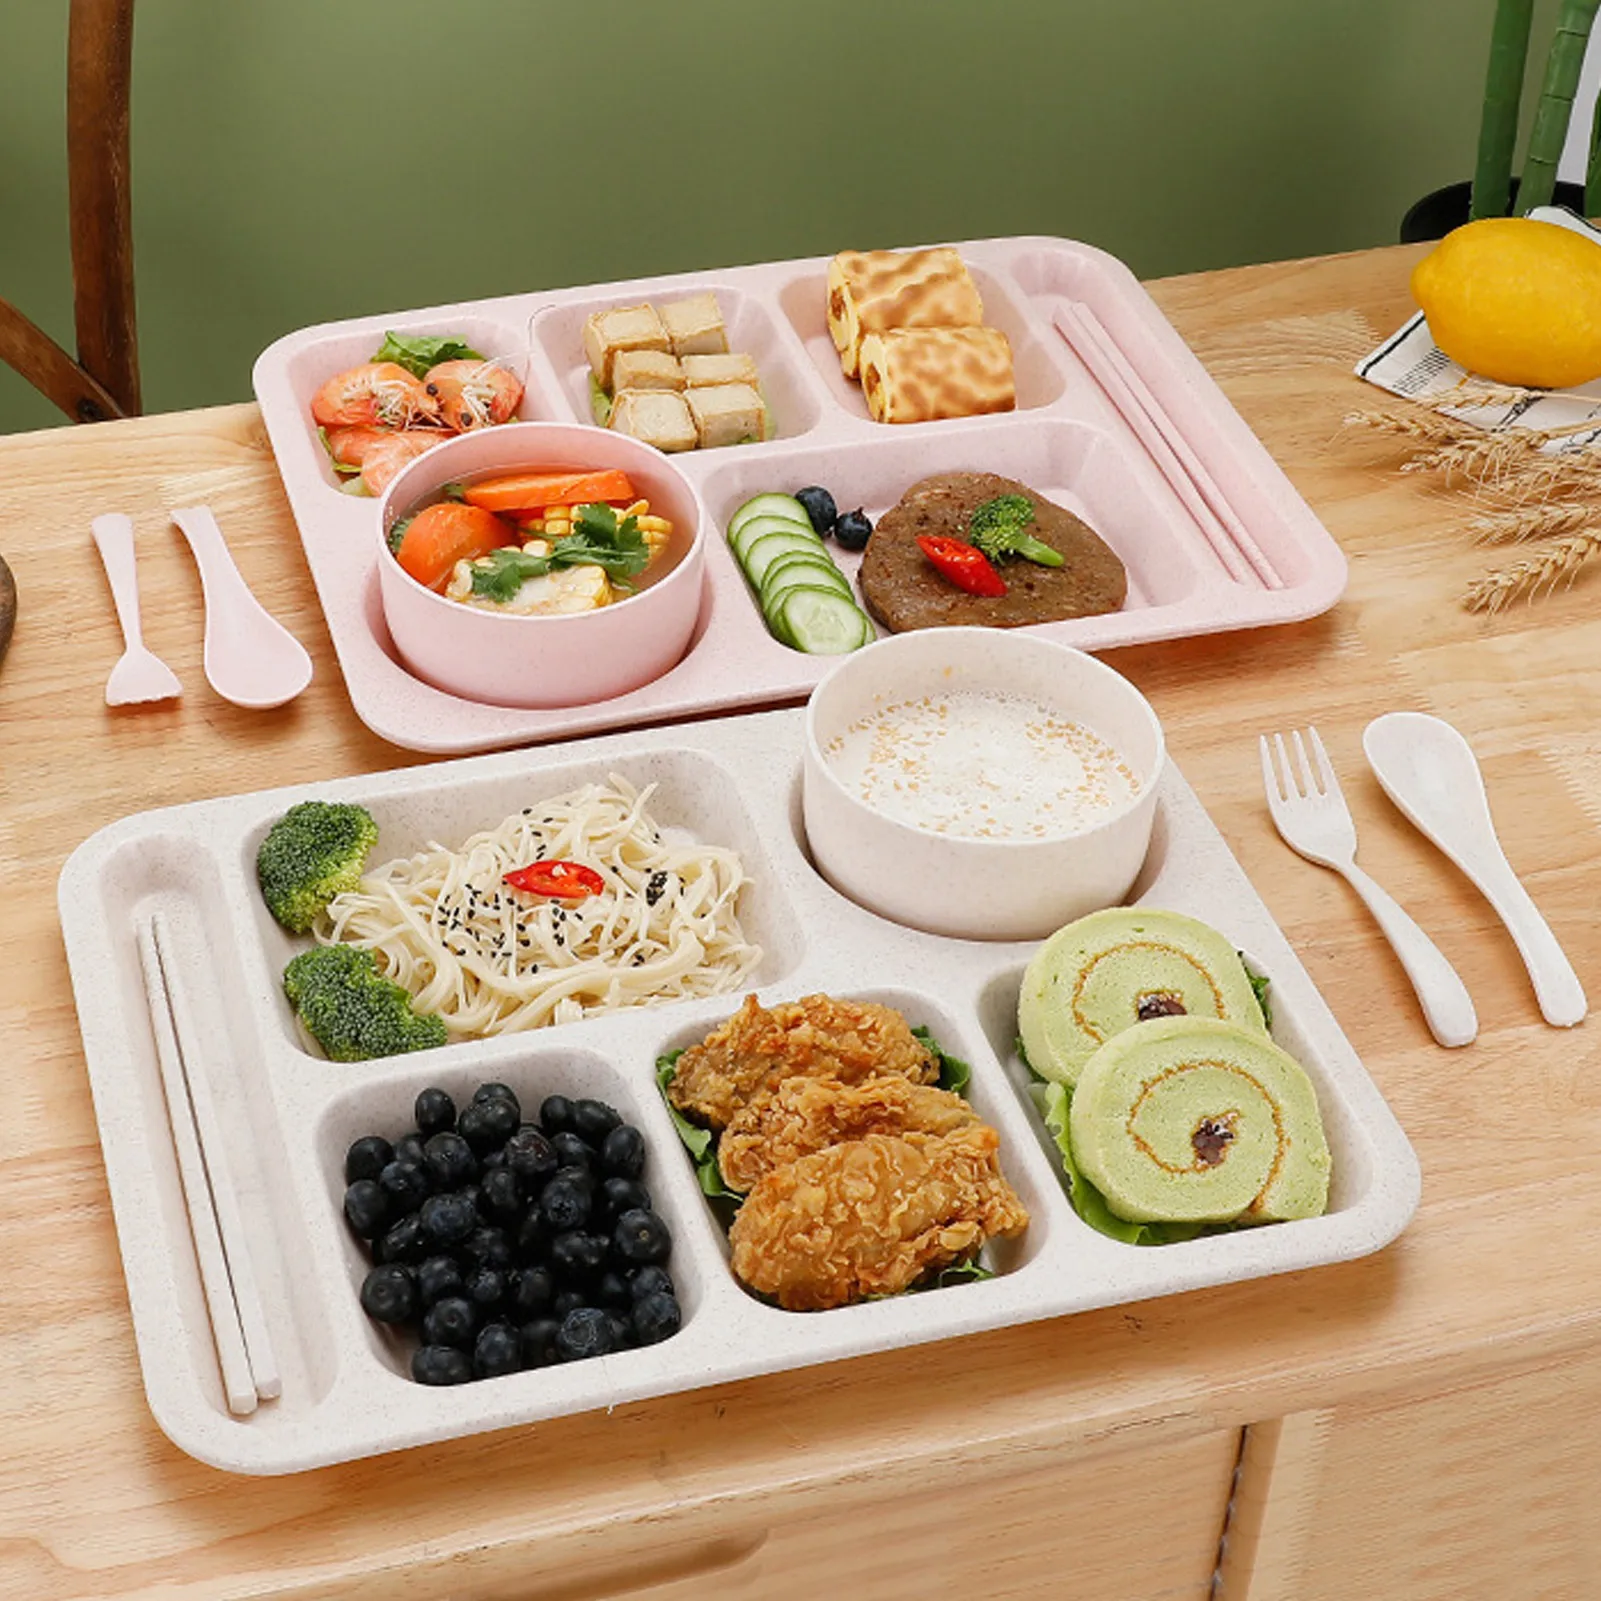 Cute Canteen Plate Food Containers Dining Hall Tray With Compartments And Lid Lunch Box Restaurant Buffet Tableware For Children